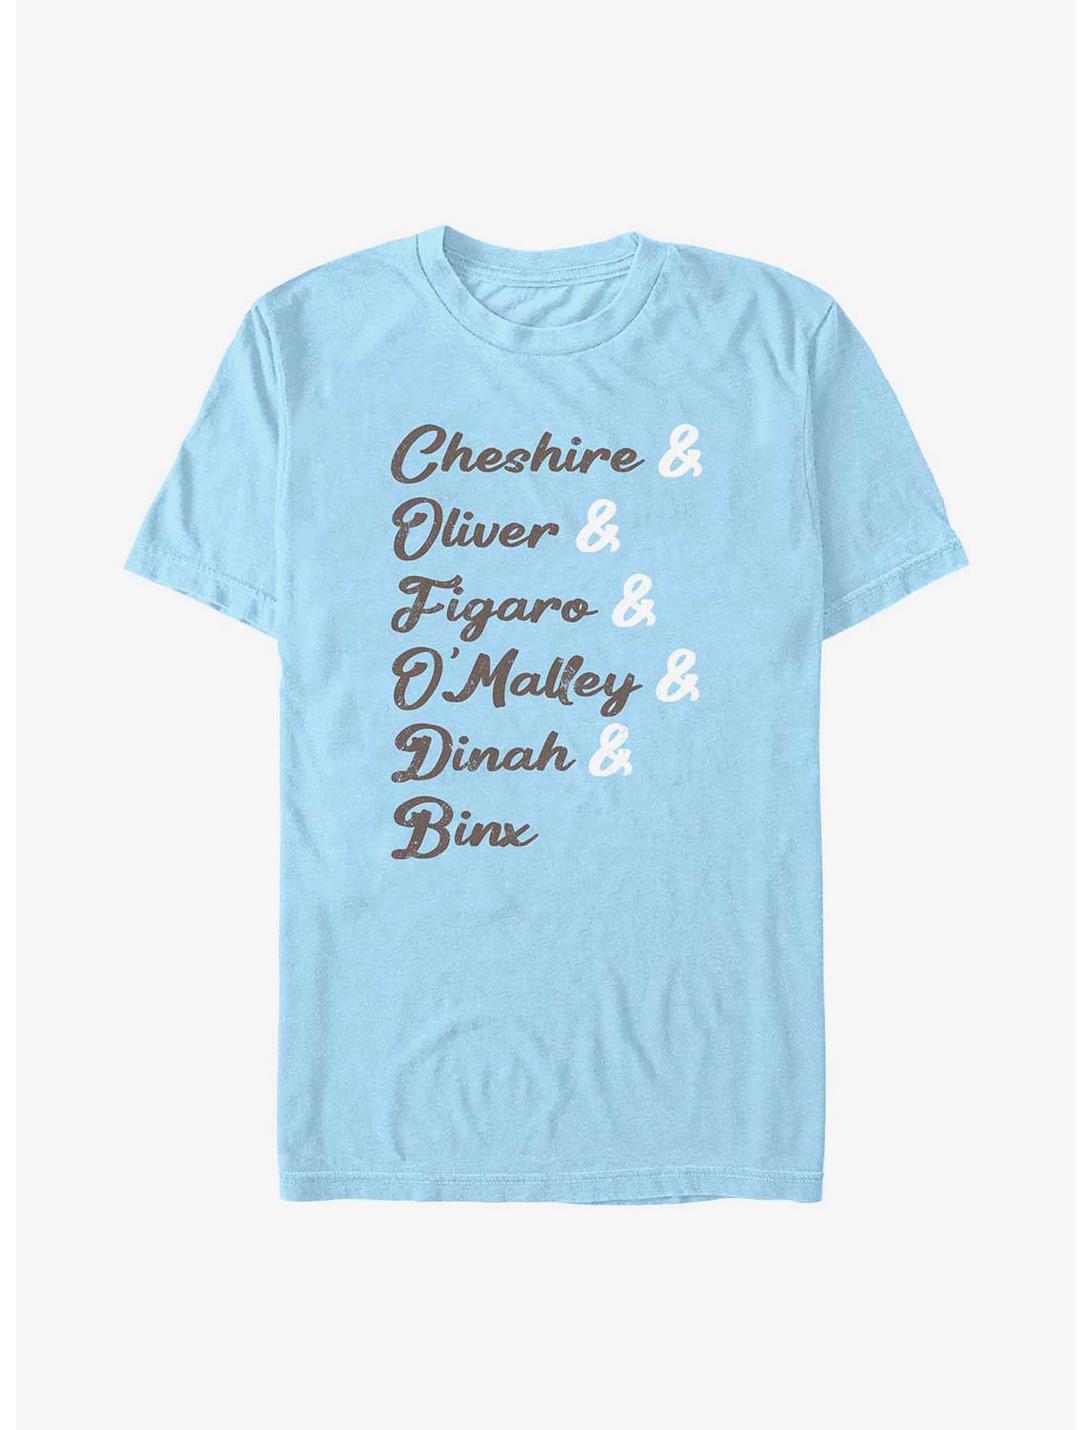 Disney Channel Cheshire, Oliver, Figaro, O'Malley, Dinah, Binx T-Shirt, LT BLUE, hi-res